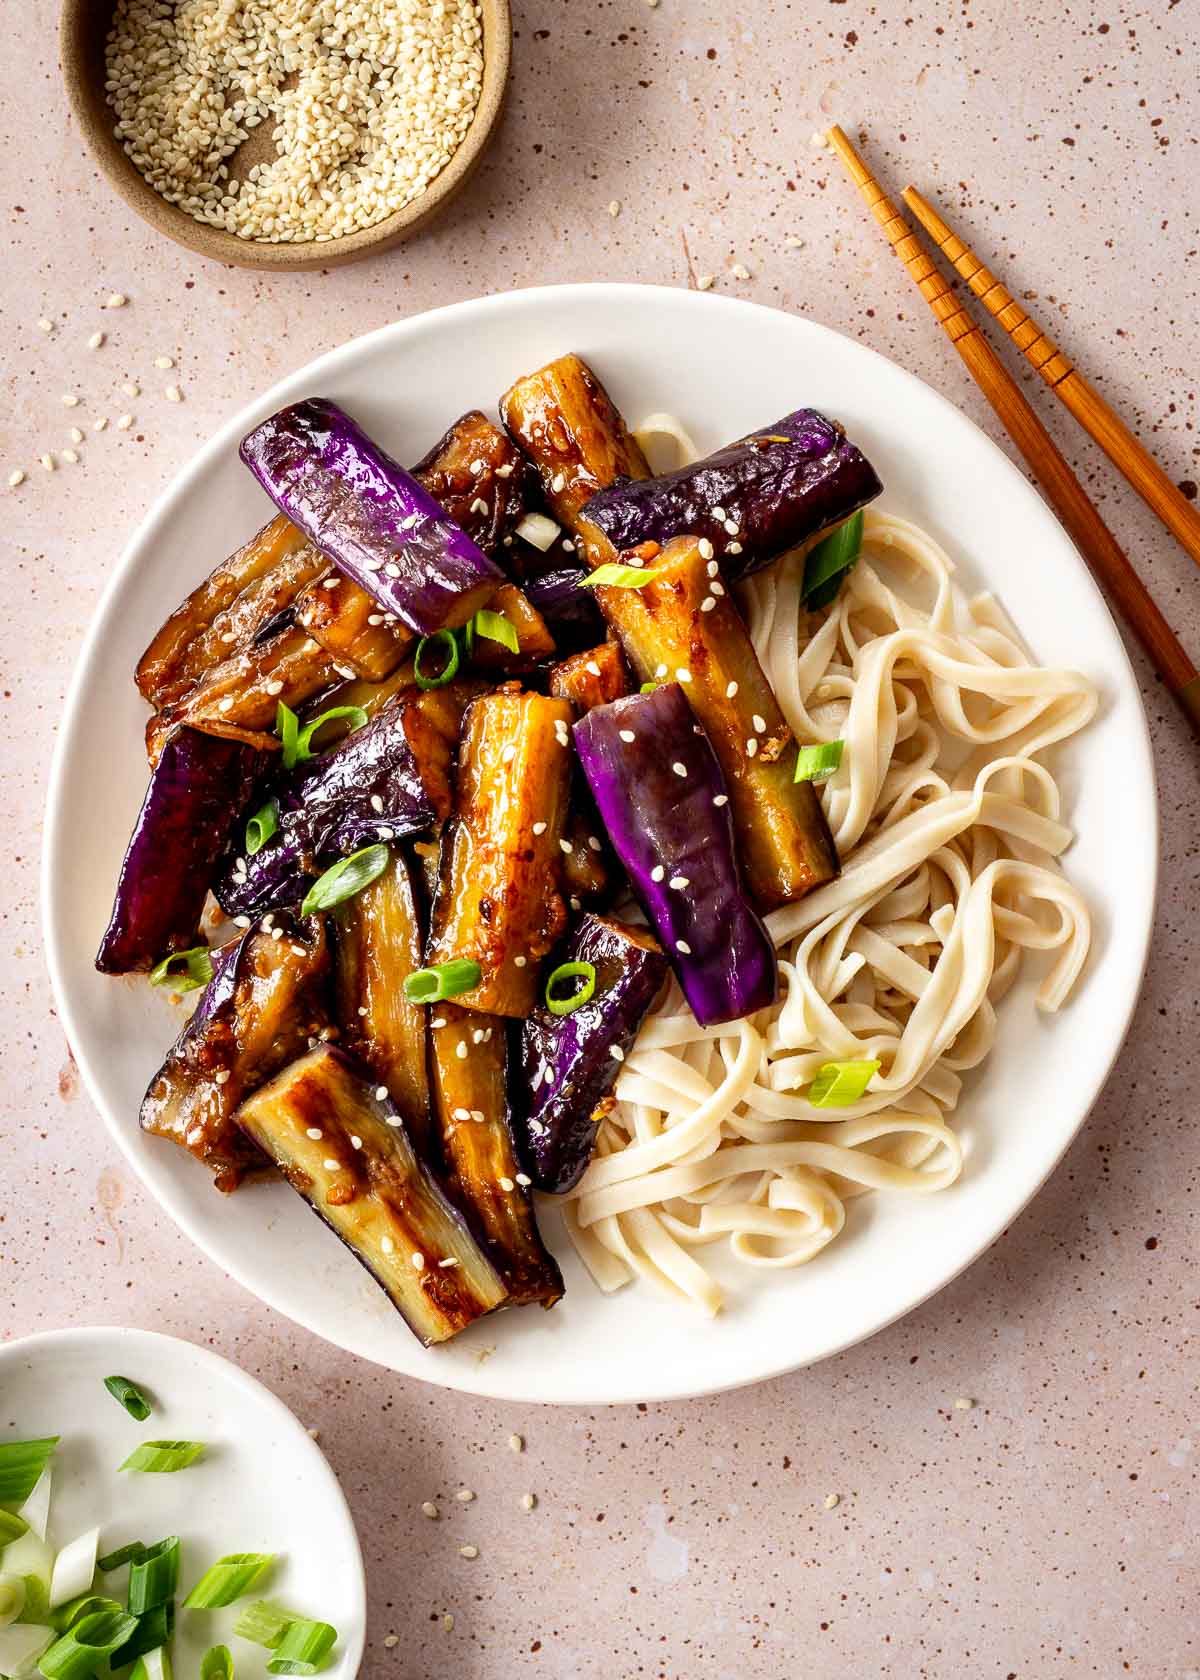 A white plate of eggplant stir fry and flat noodles, decorated with green onions and sesame seeds. A pair of chopsticks and dishes of sesame and green onions sit nearby.